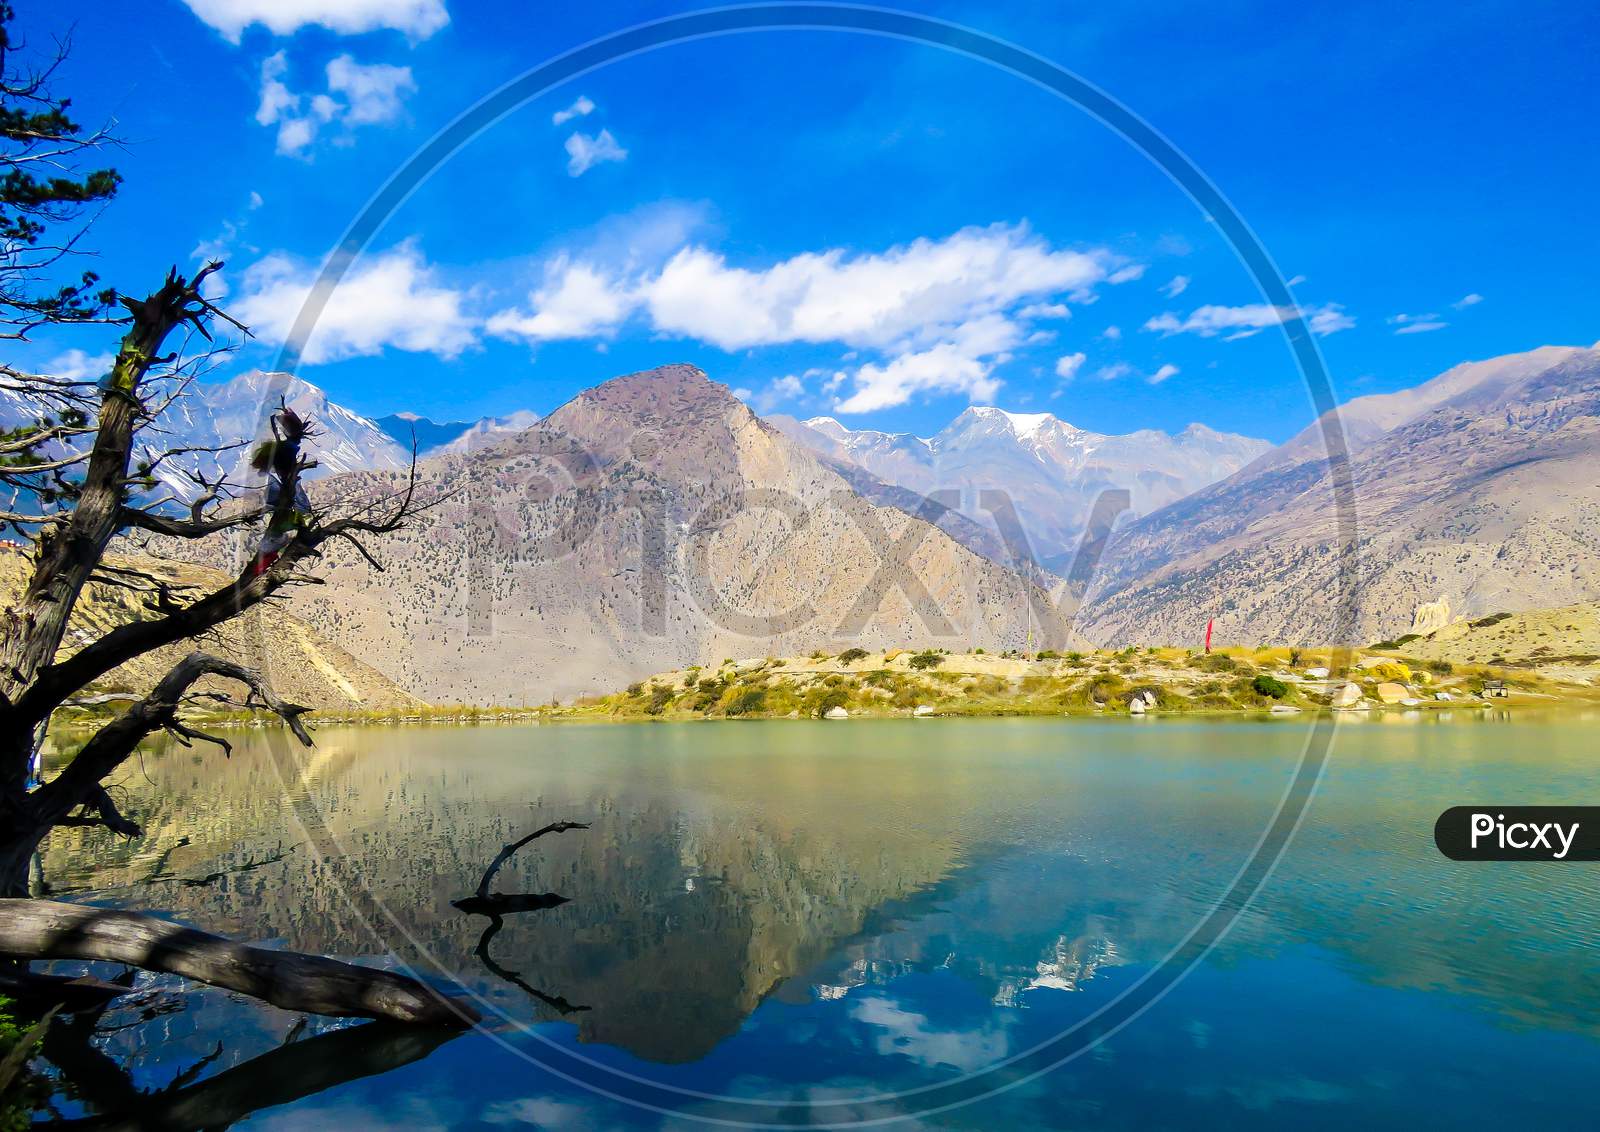 Amazing Landscape And the Reflection of the Beautiful Mountain in the water from Mustang,Nepal.